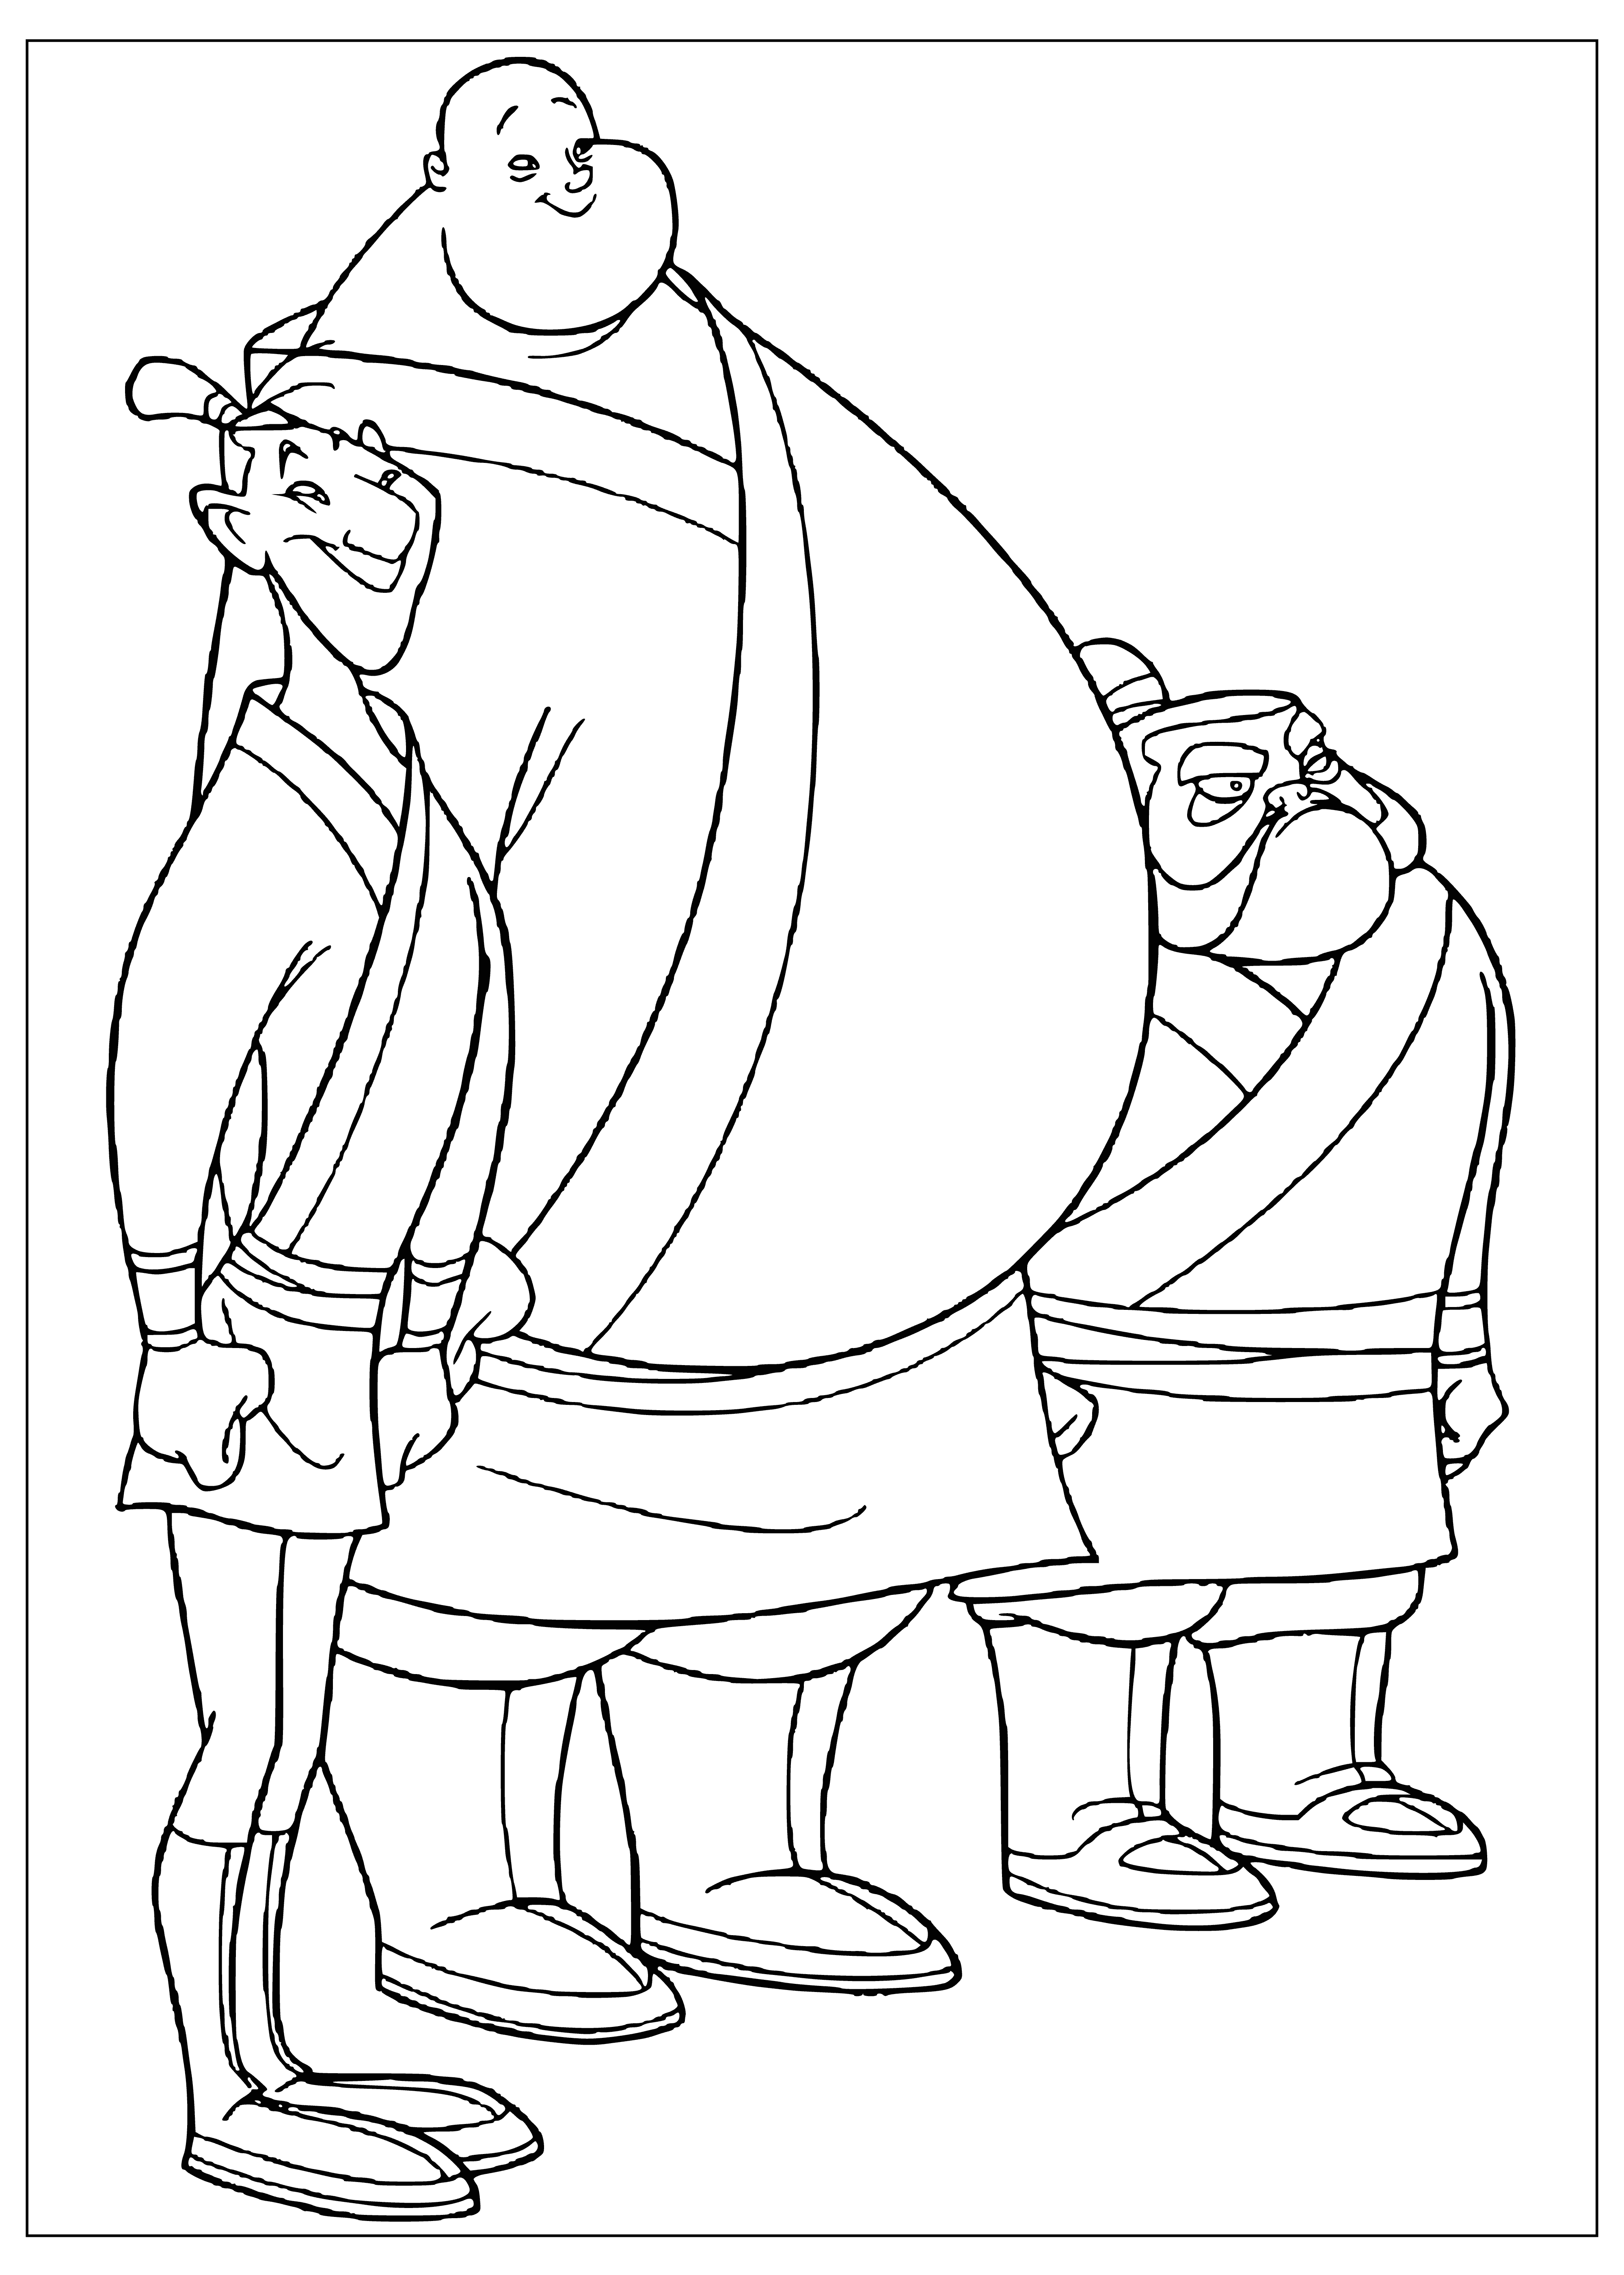 coloring page: Mulan & 3 companions in Chinese military attire, determined to win the battle, stand ready.